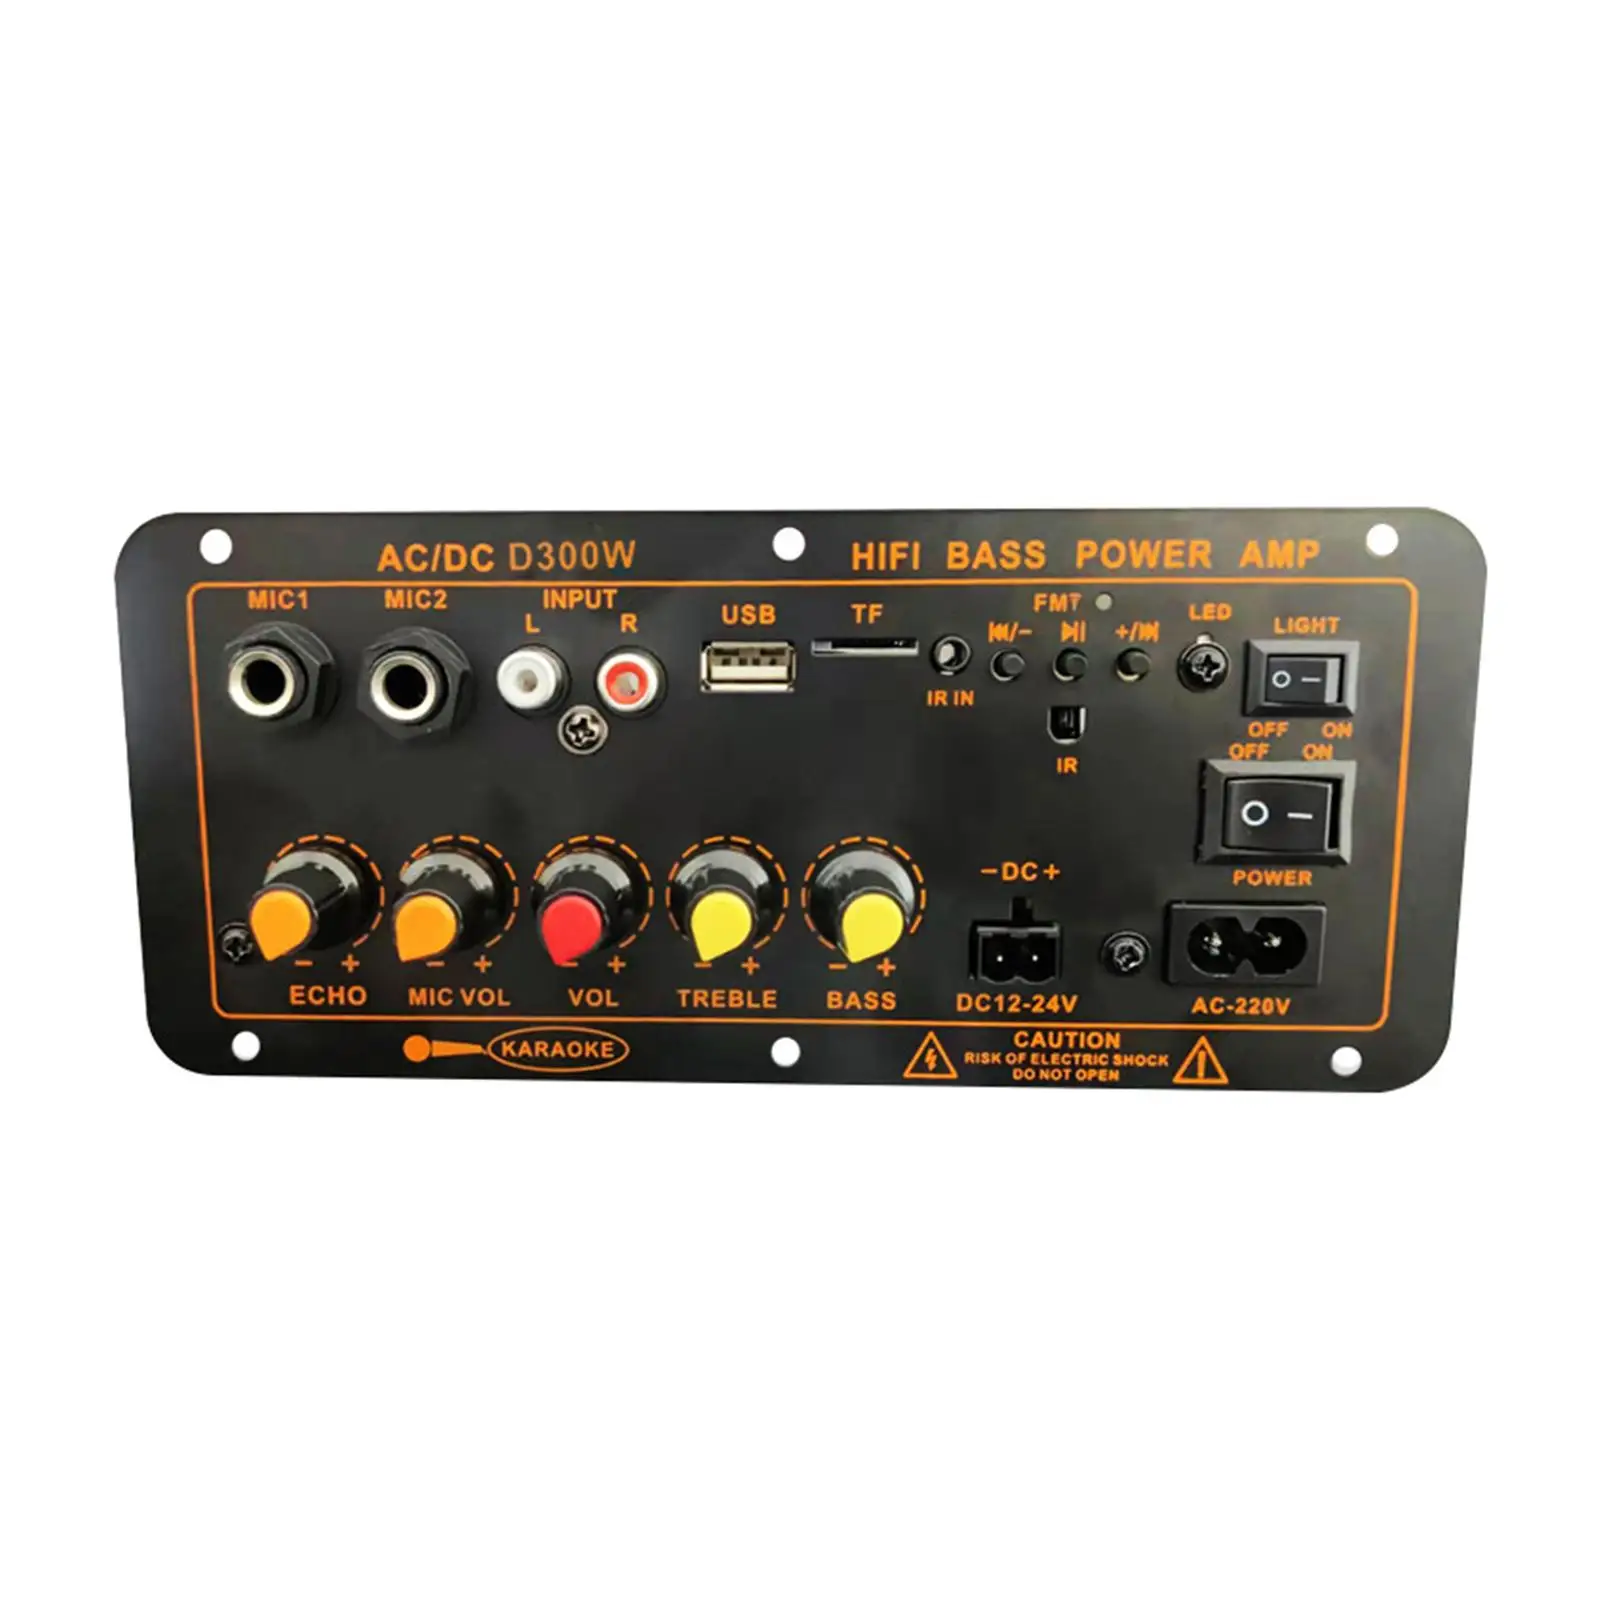 Bluetooth Digital Audio Amp Amplifier Board EU 220V Adapter Durable with Bass and Treble Control Knobs with Remote Control